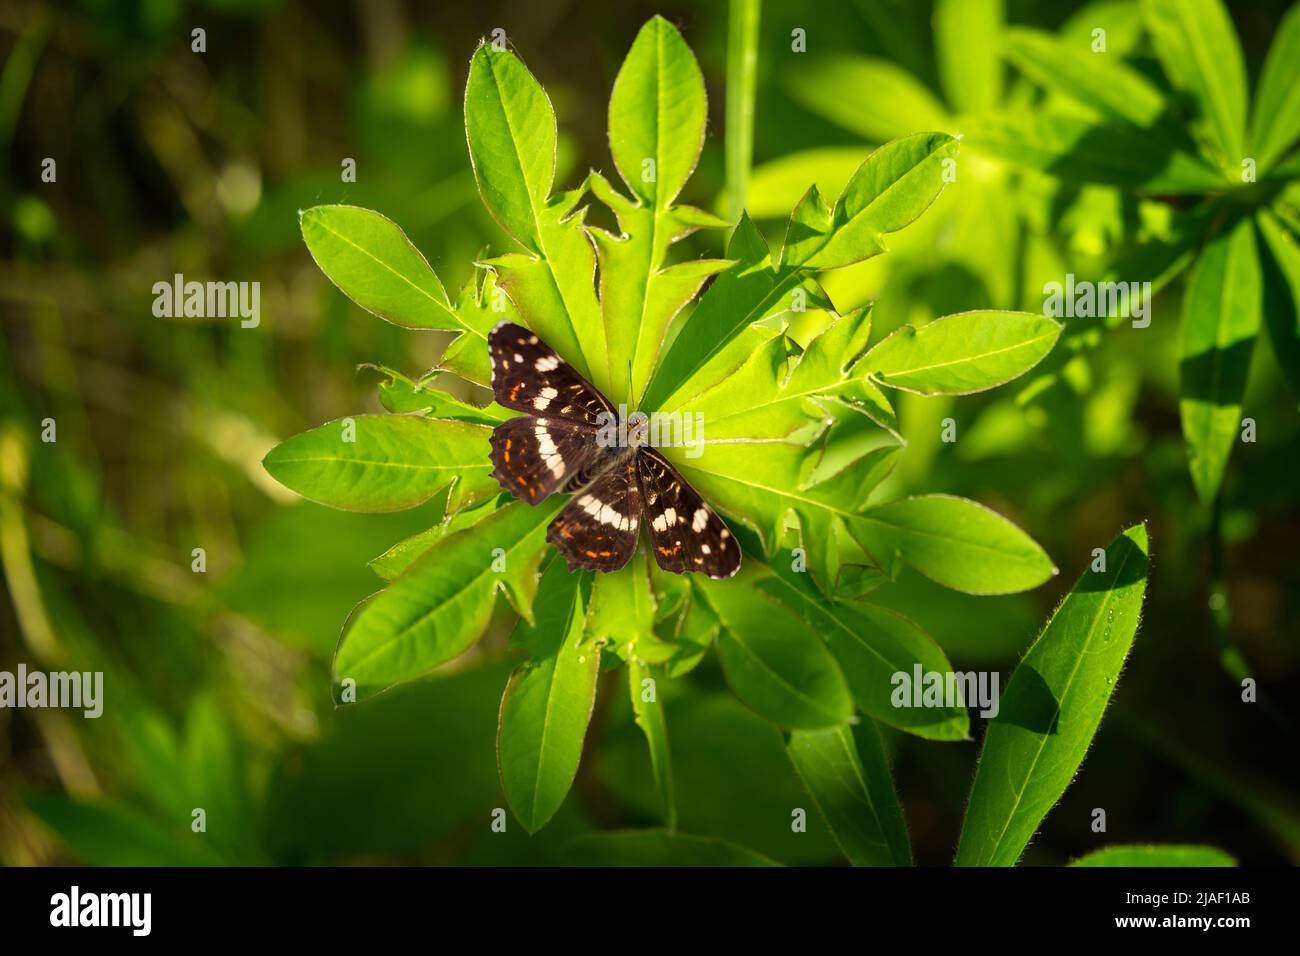 Butterfly on a carved lupine leaf. Butterfly effect and the concept of changing our environment affects everything. Stock Photo